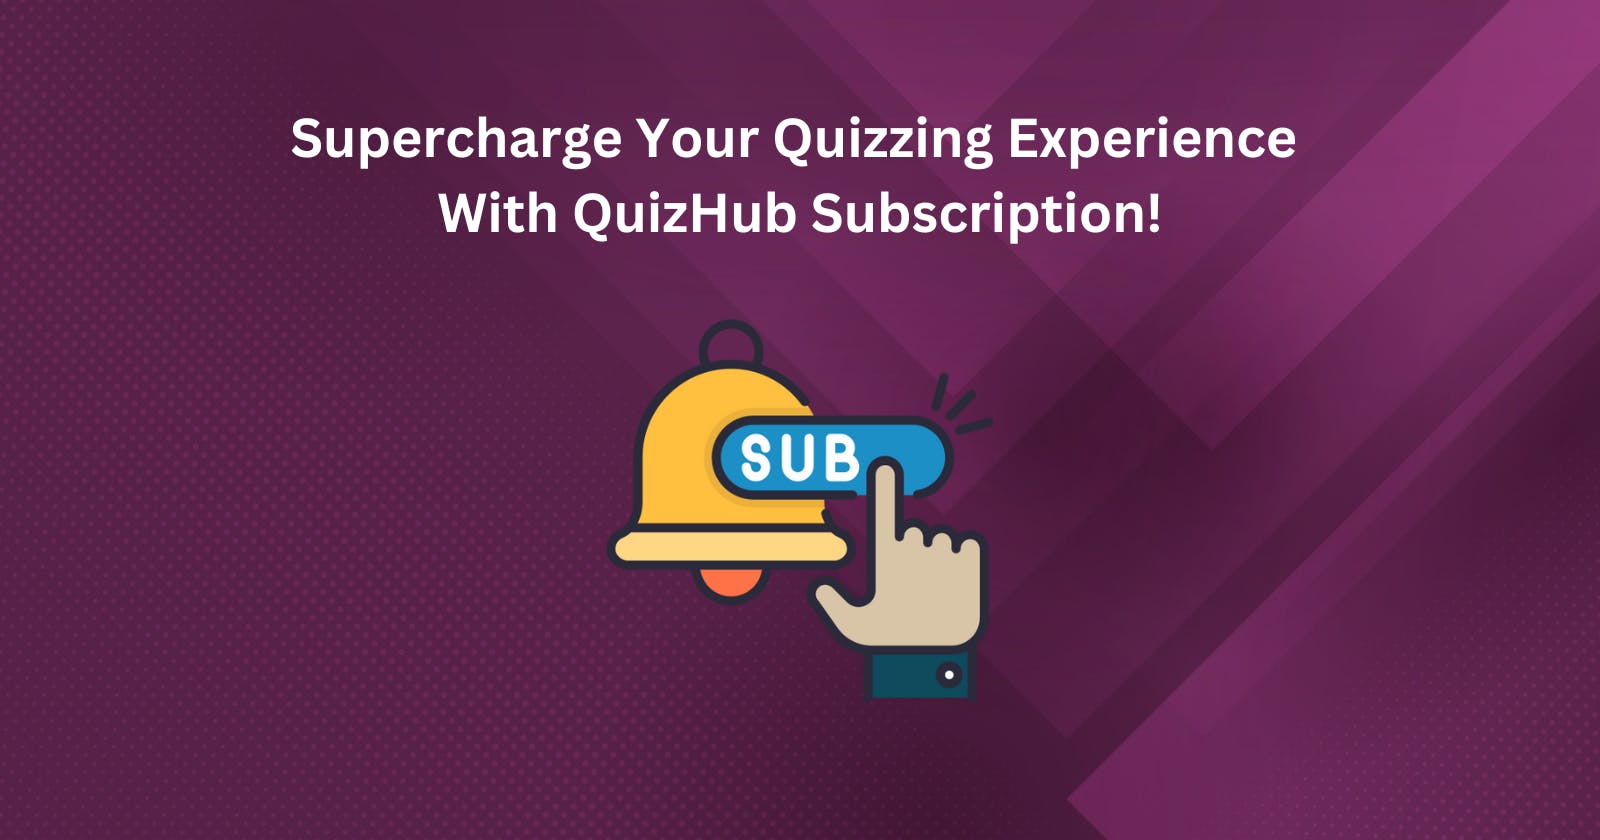 Supercharge Your Quizzing Experience With QuizHub Subscription!